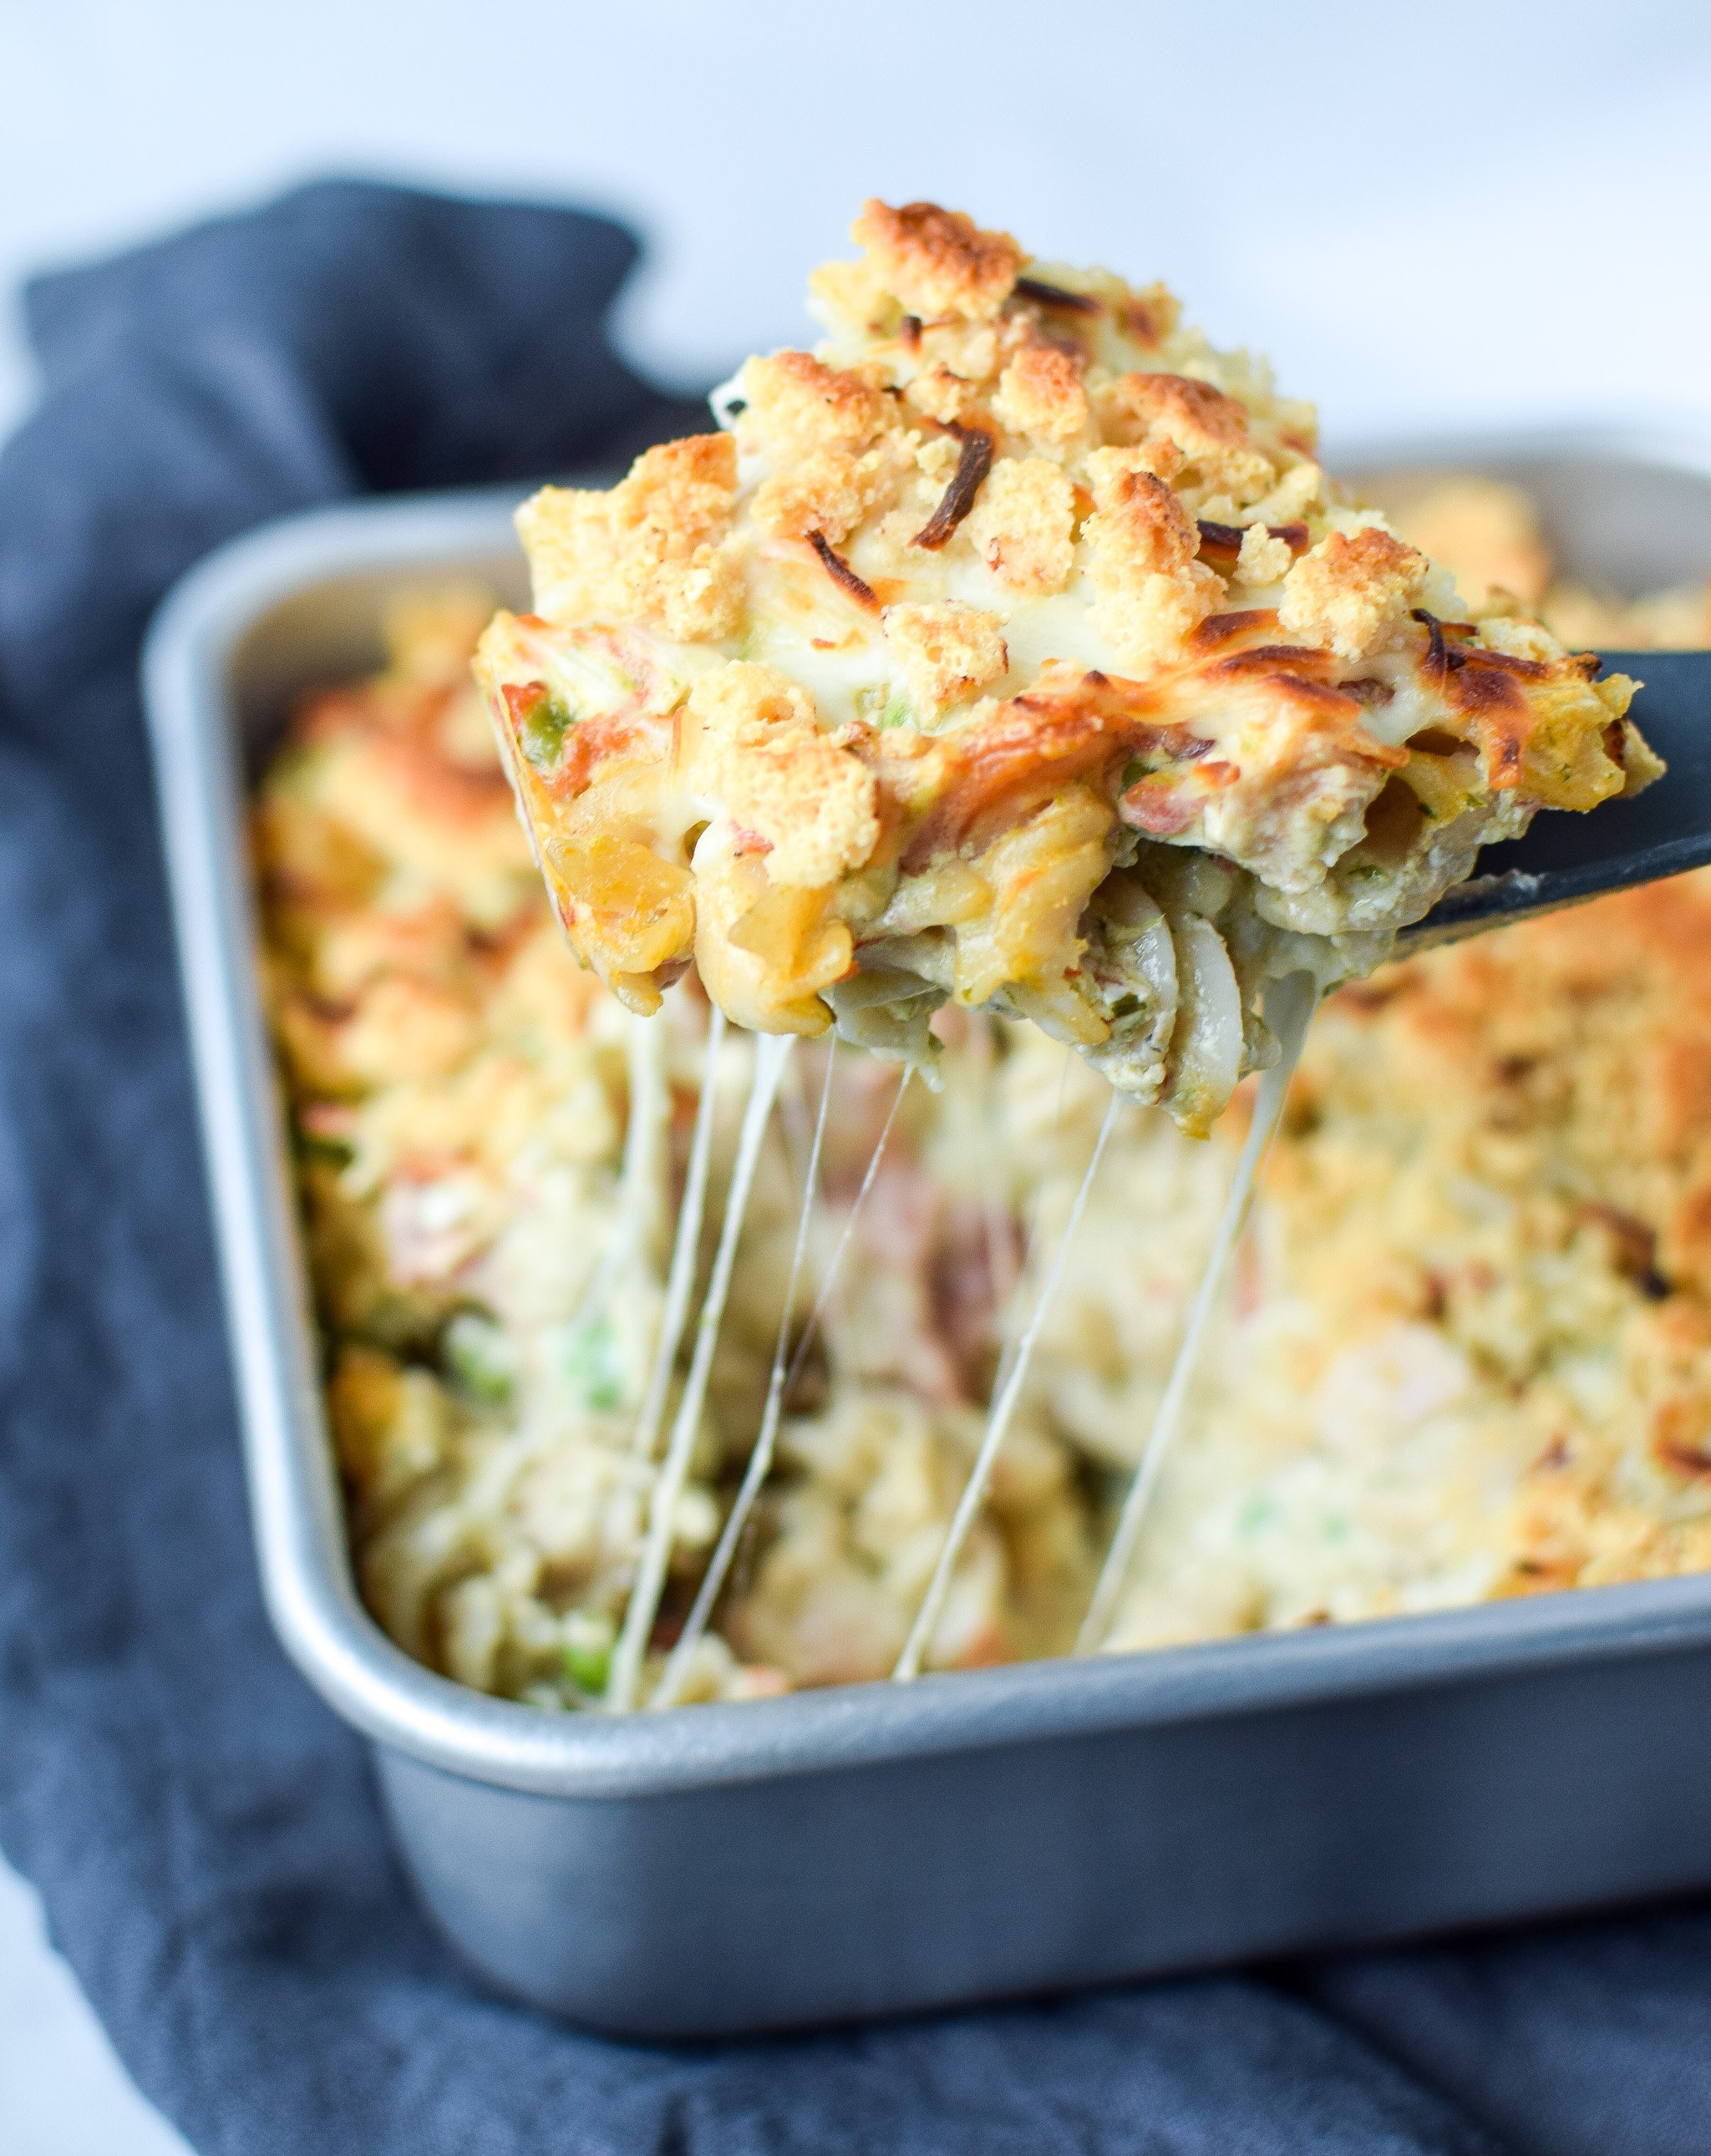 Creamy Pesto Pasta Chicken Bake with Peas - Project Meal Plan